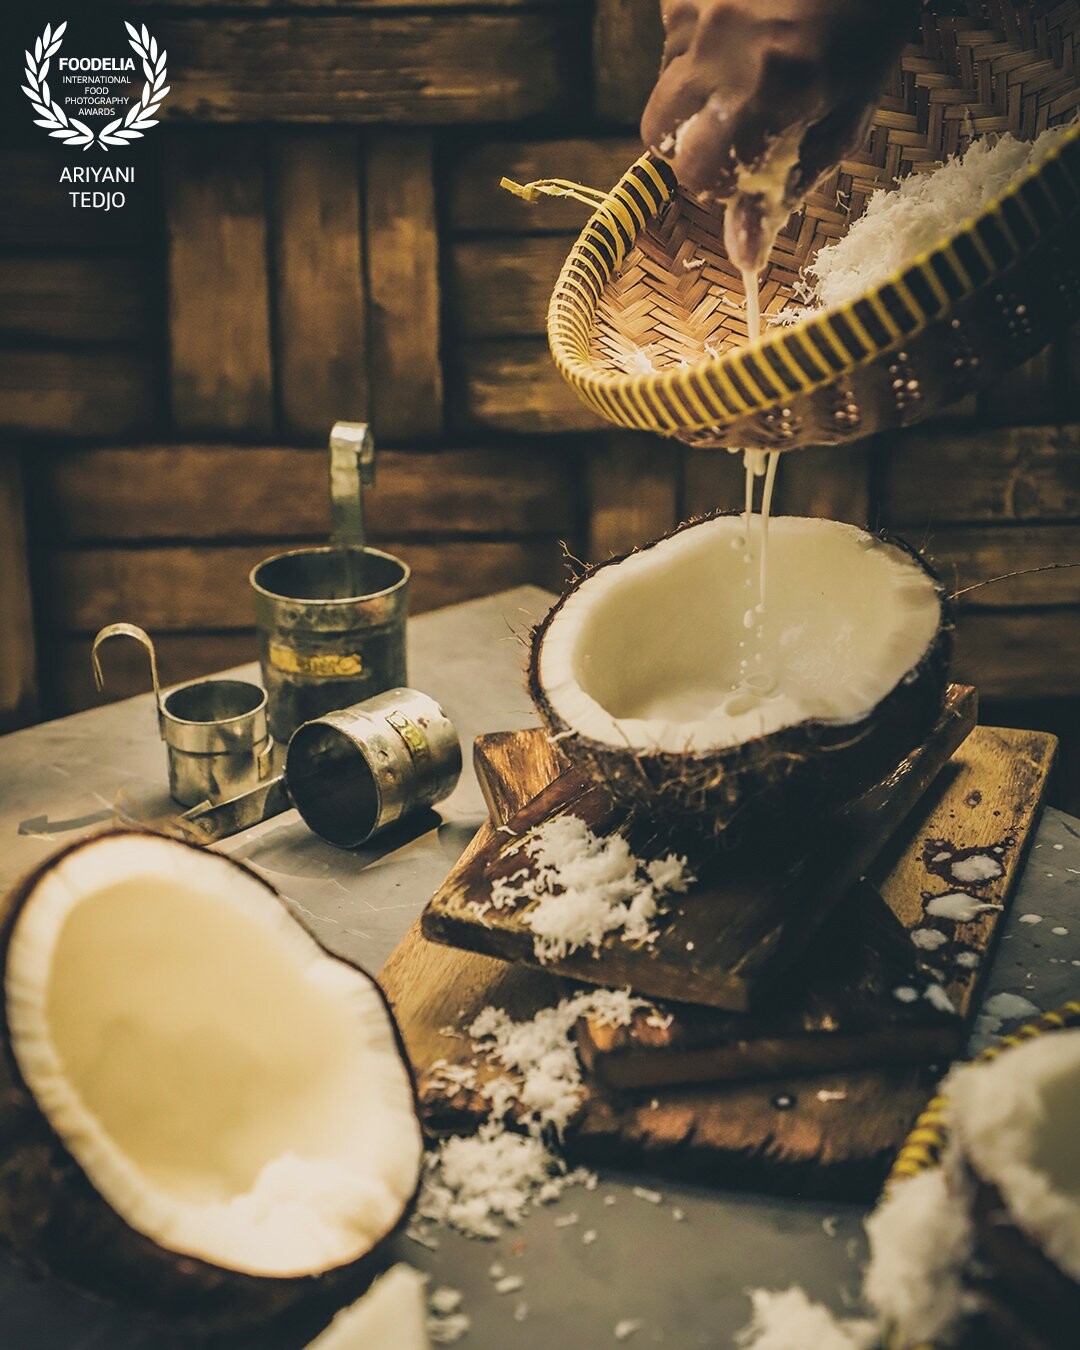 Coconut milk is one signature ingredient in Indonesian cuisine. Using freshly made coconut milk is still preferred by some people, even though it is a pretty exhausting process. <br />
<br />
Here the milk is extracted by hand-squeezing the grated coconut that has been mixed with warm water. A traditional bamboo strainer specially made for coconut milk is used to catch the loose coconut from falling into the extracted liquid. A set of traditional tin measuring cups commonly used to measure coconut milk is shown in the scene.